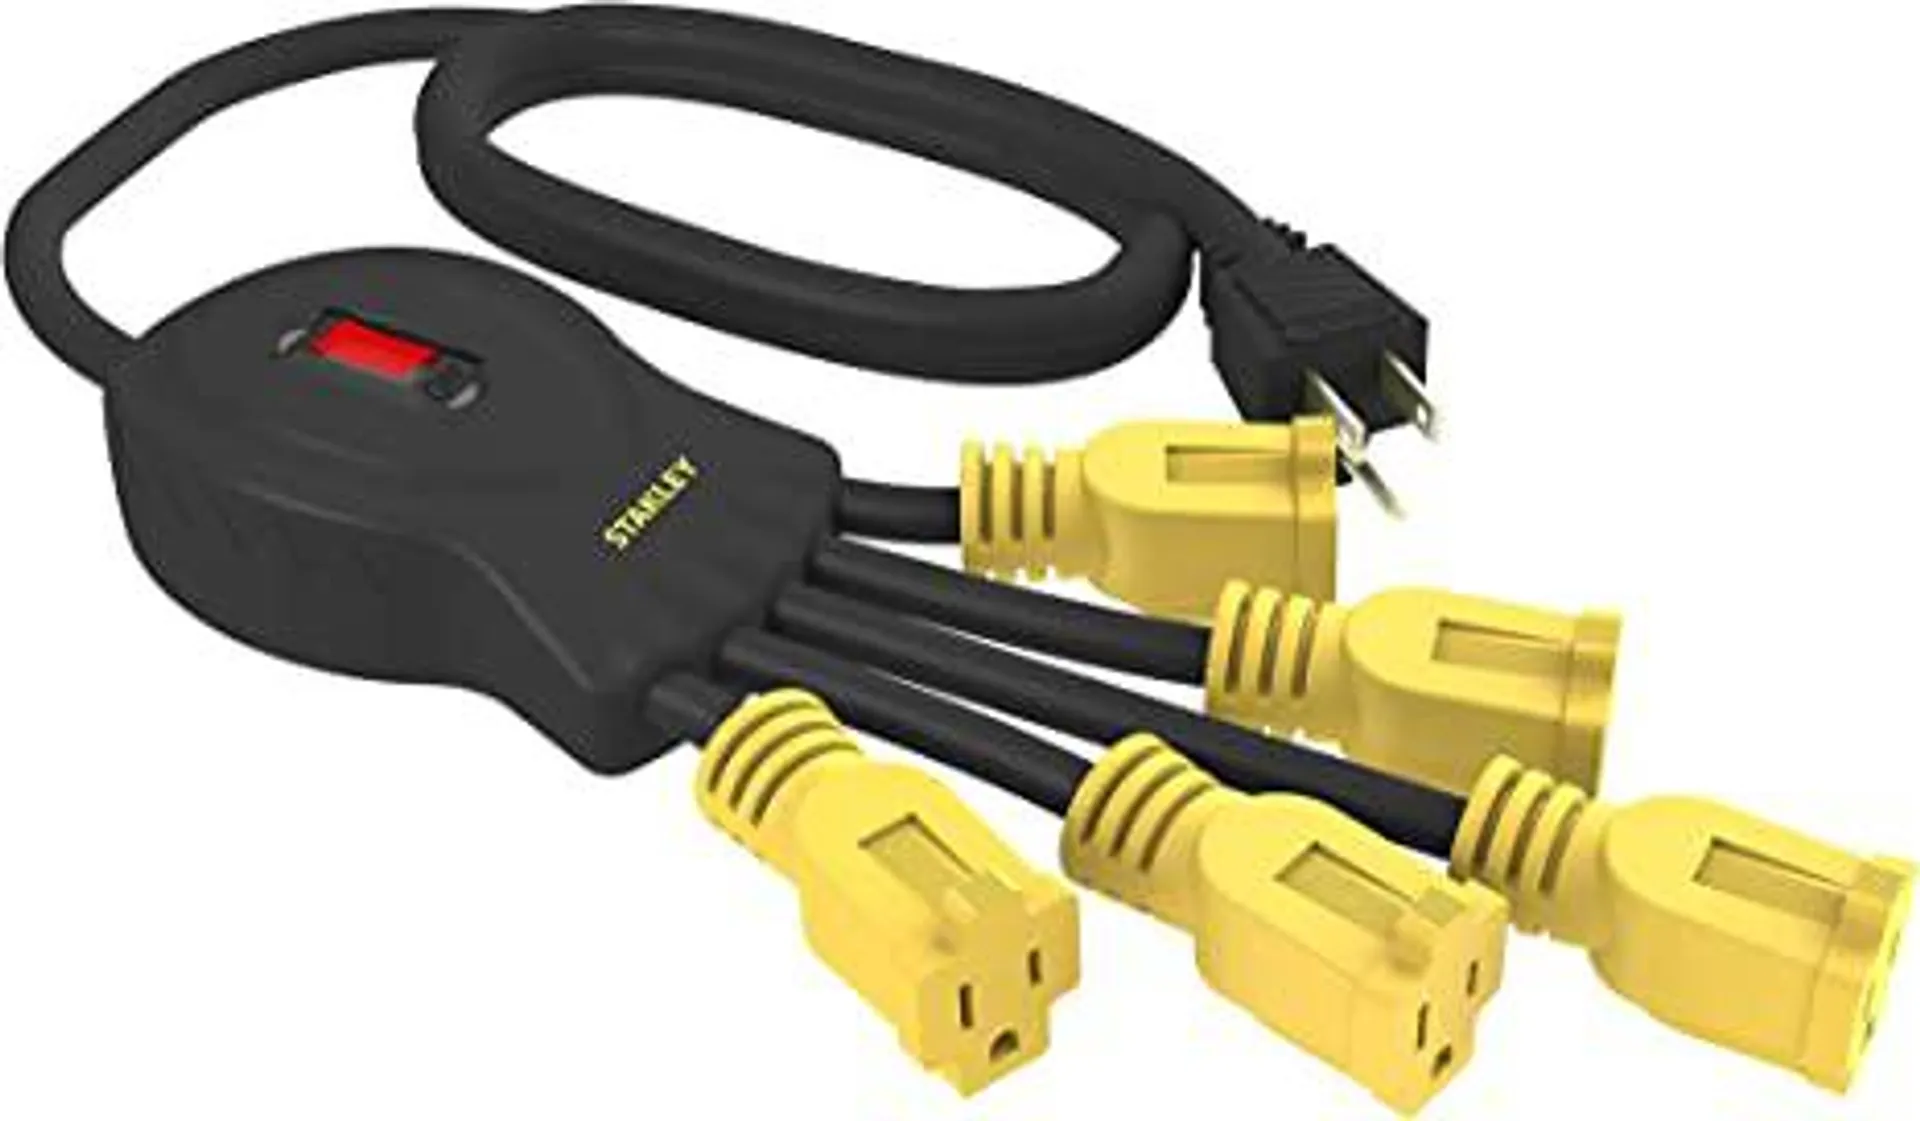 Stanley 31500 PowerSquid 5-Outlet Multiplier (Yellow) Power Cords